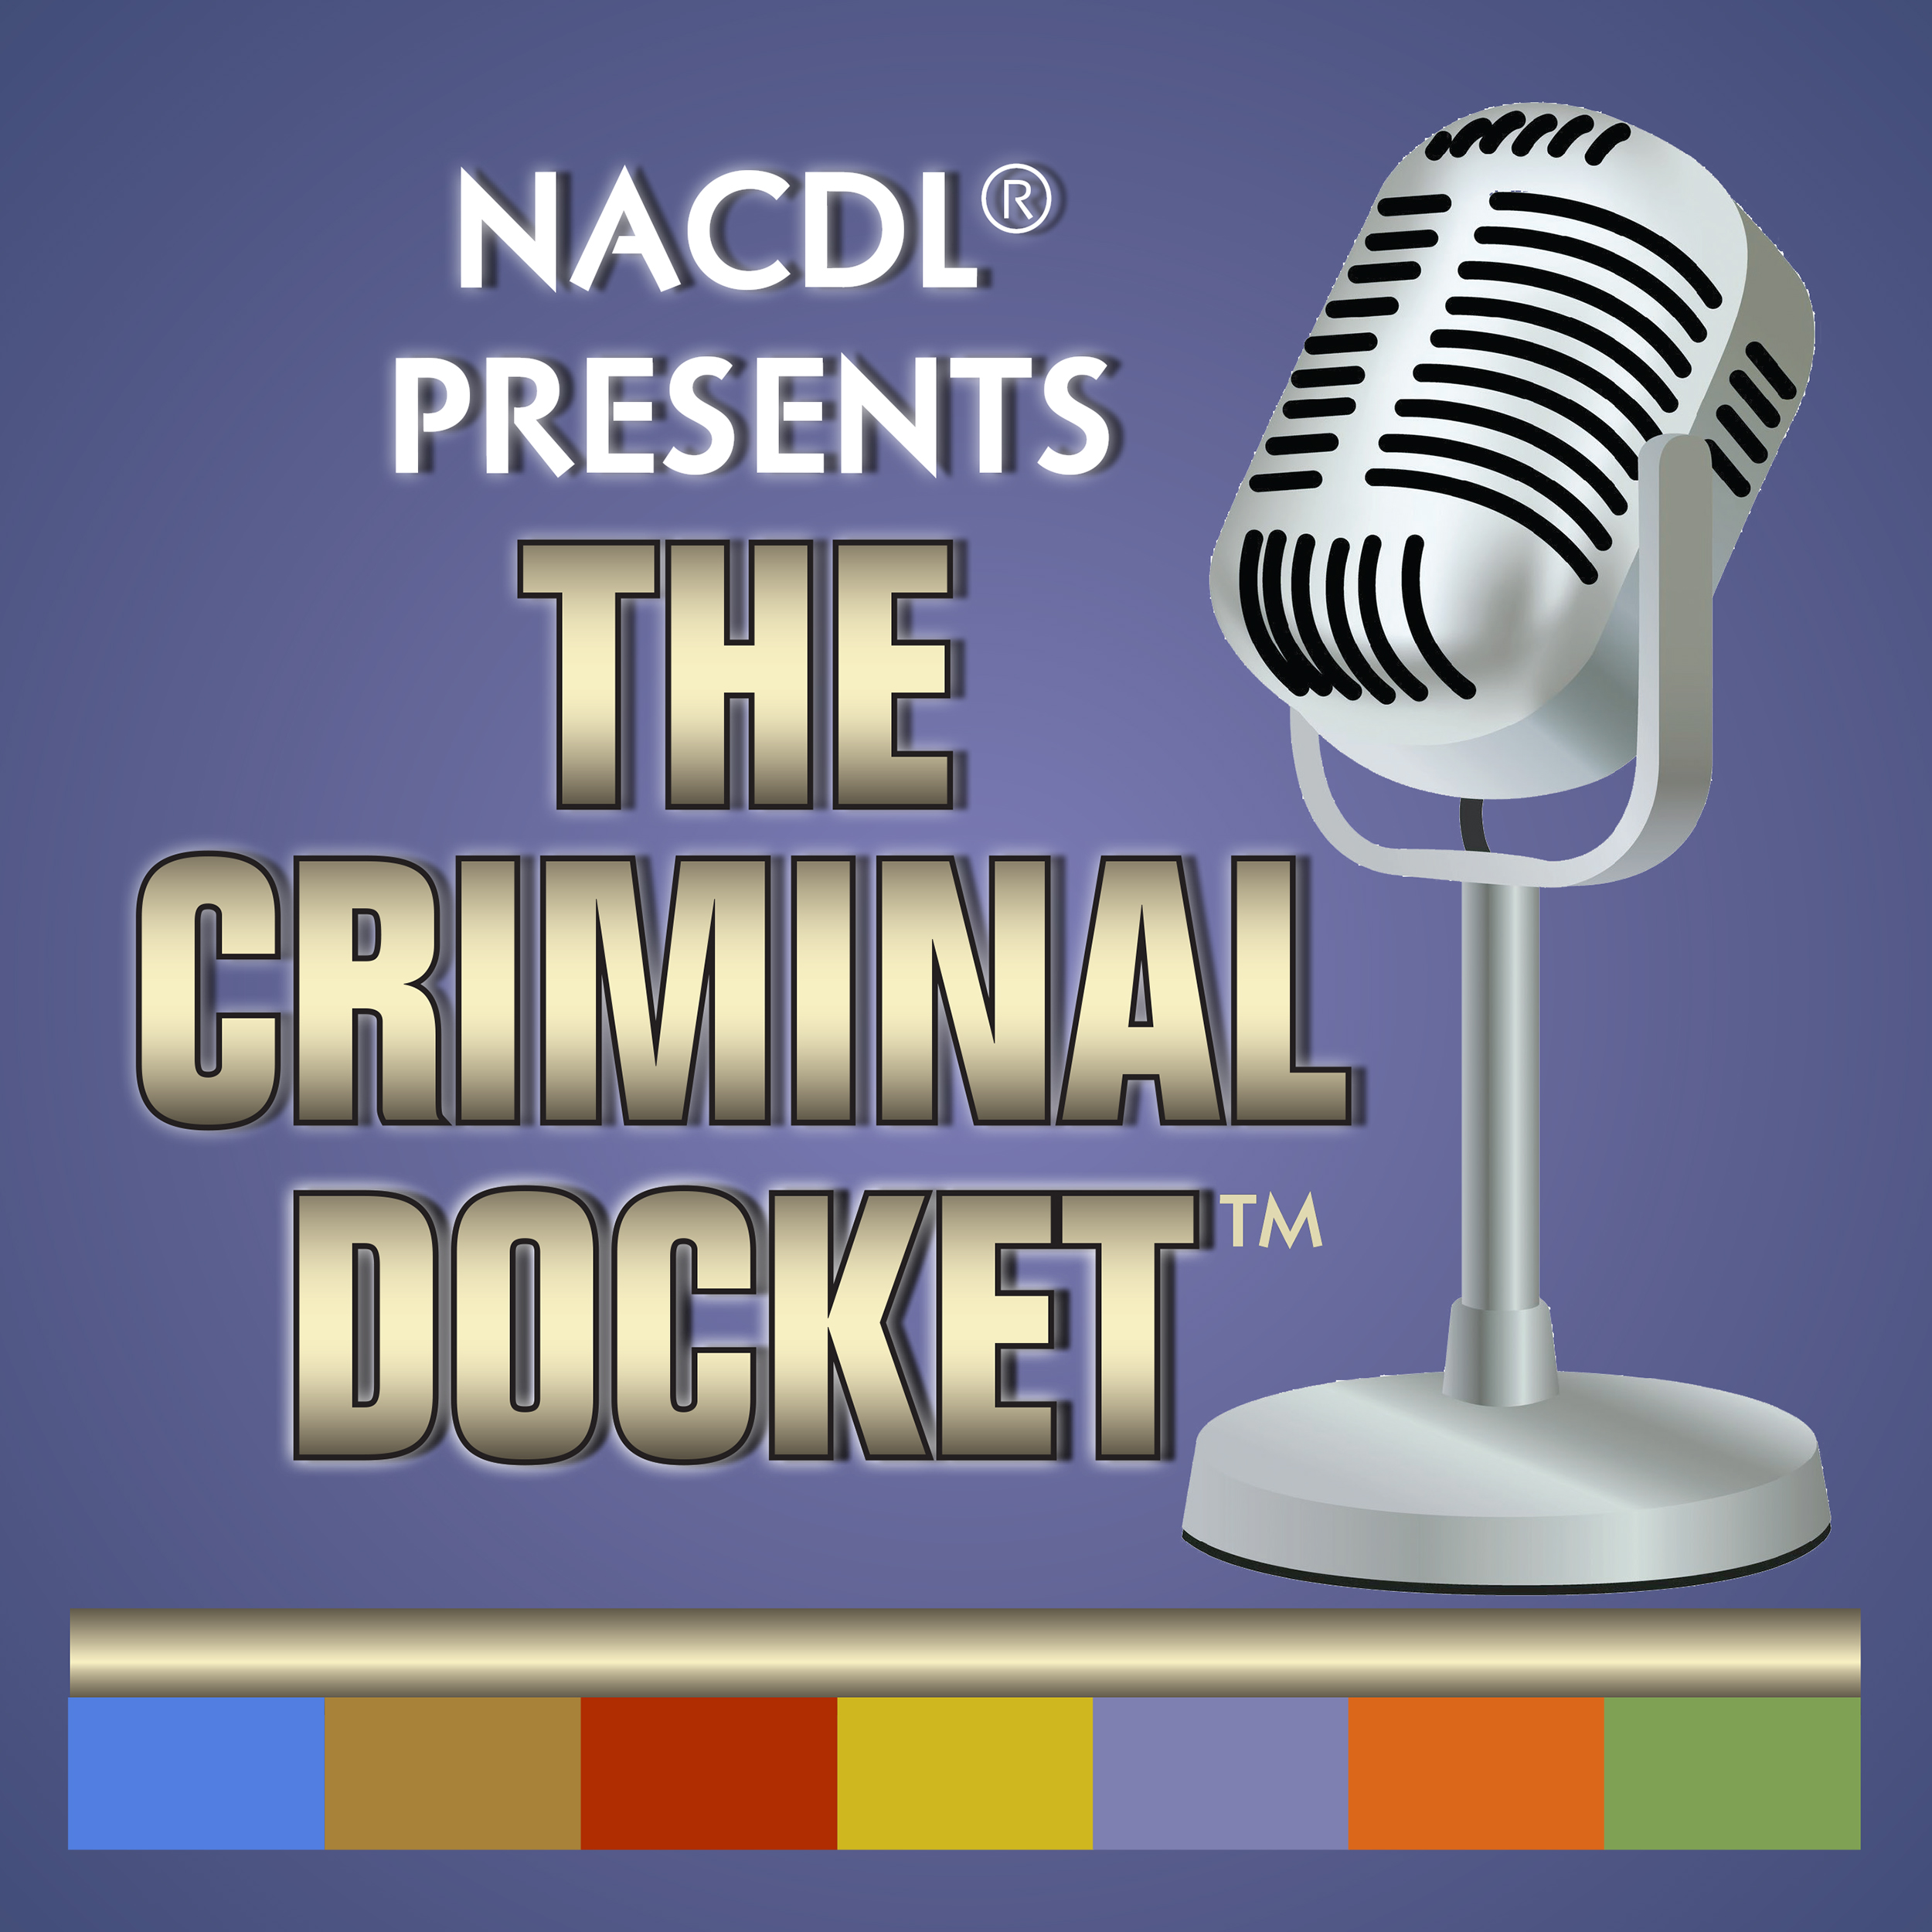 Ep.51 – Packingham v. North Carolina: Collateral Consequences at the High Court + 